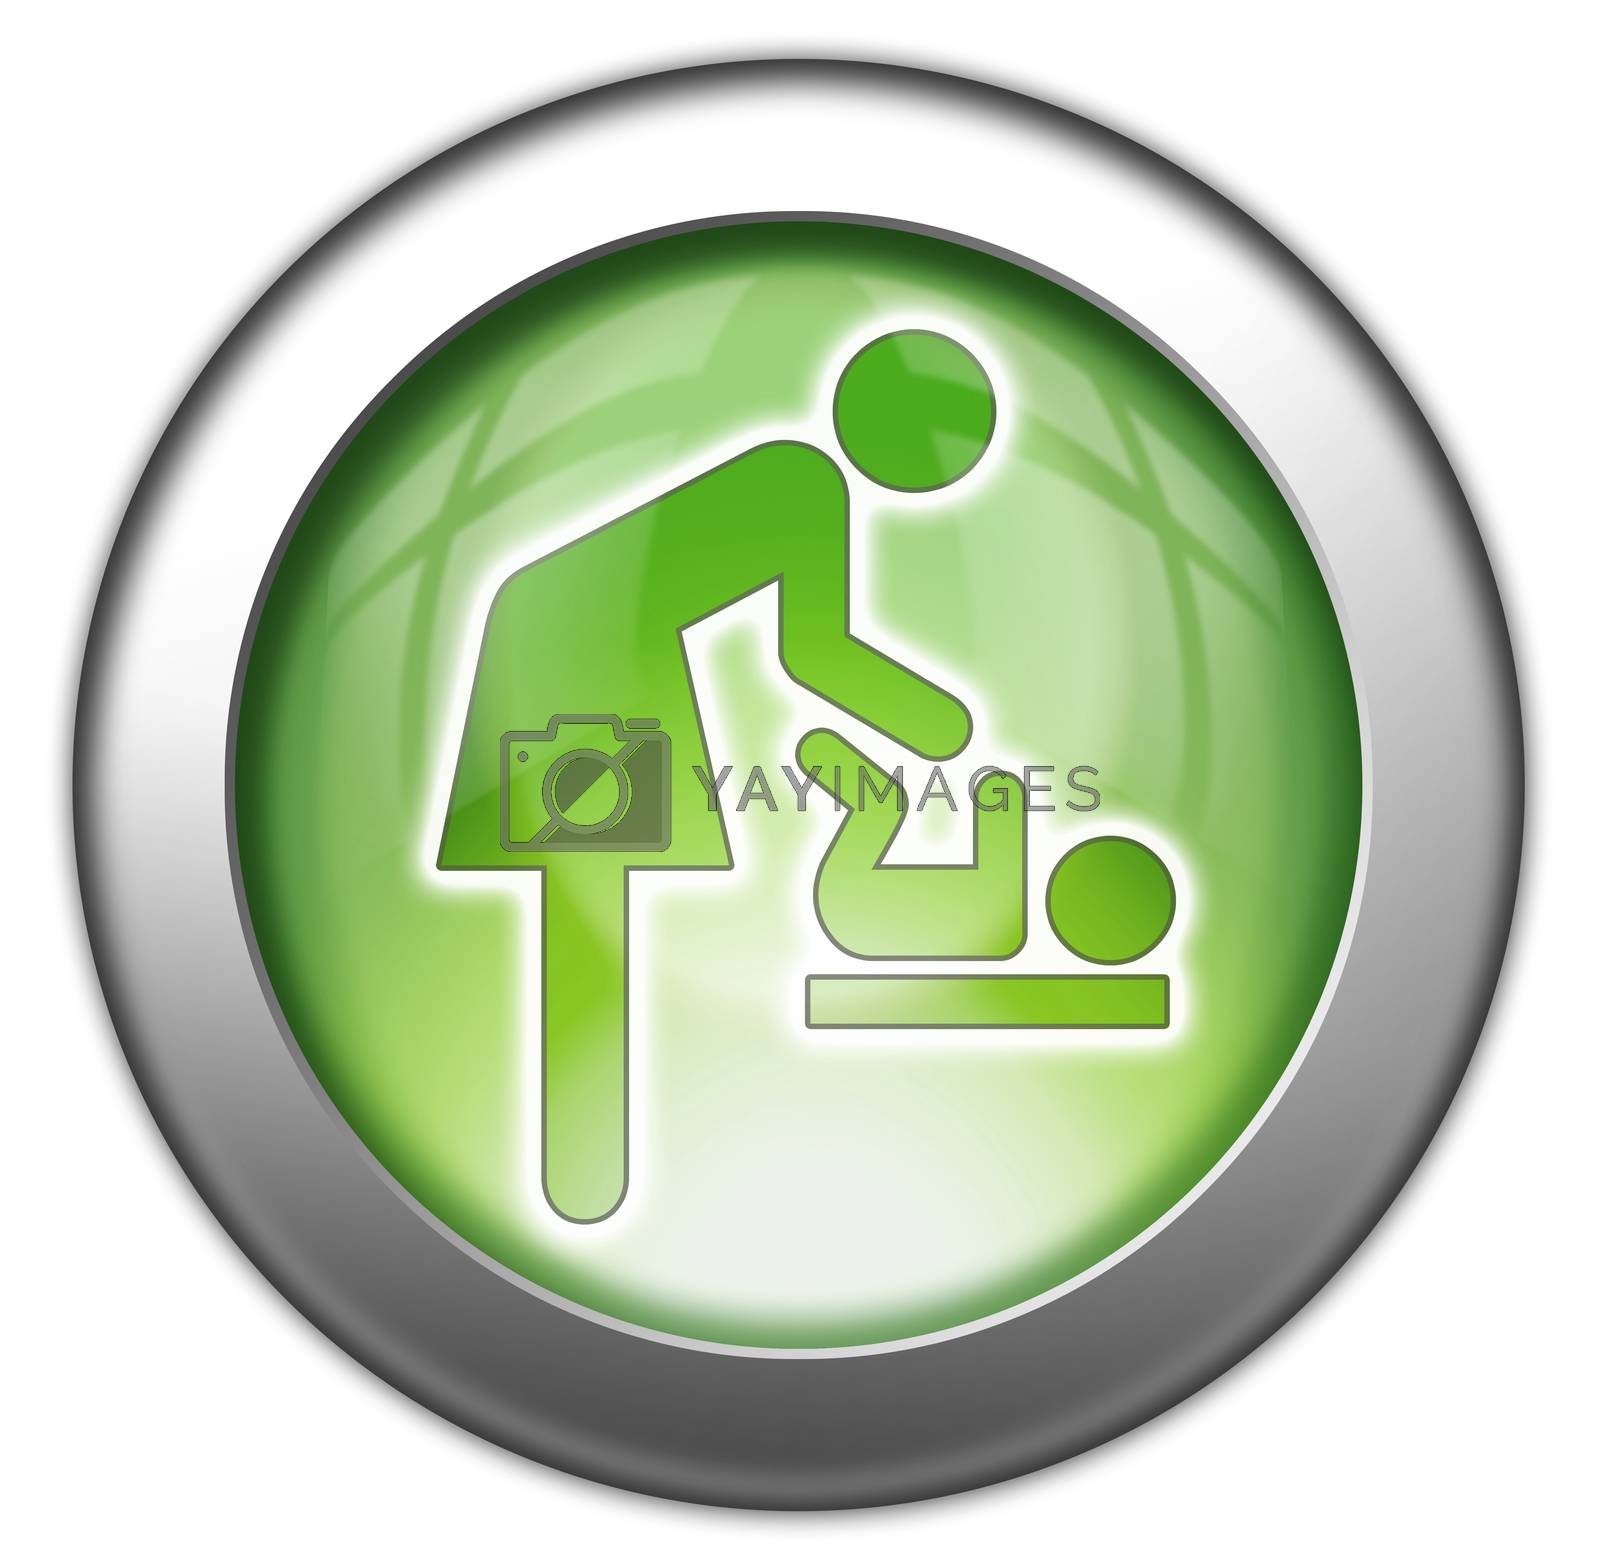 Royalty free image of Icon/Button/Pictogram "Baby Change" by mindscanner